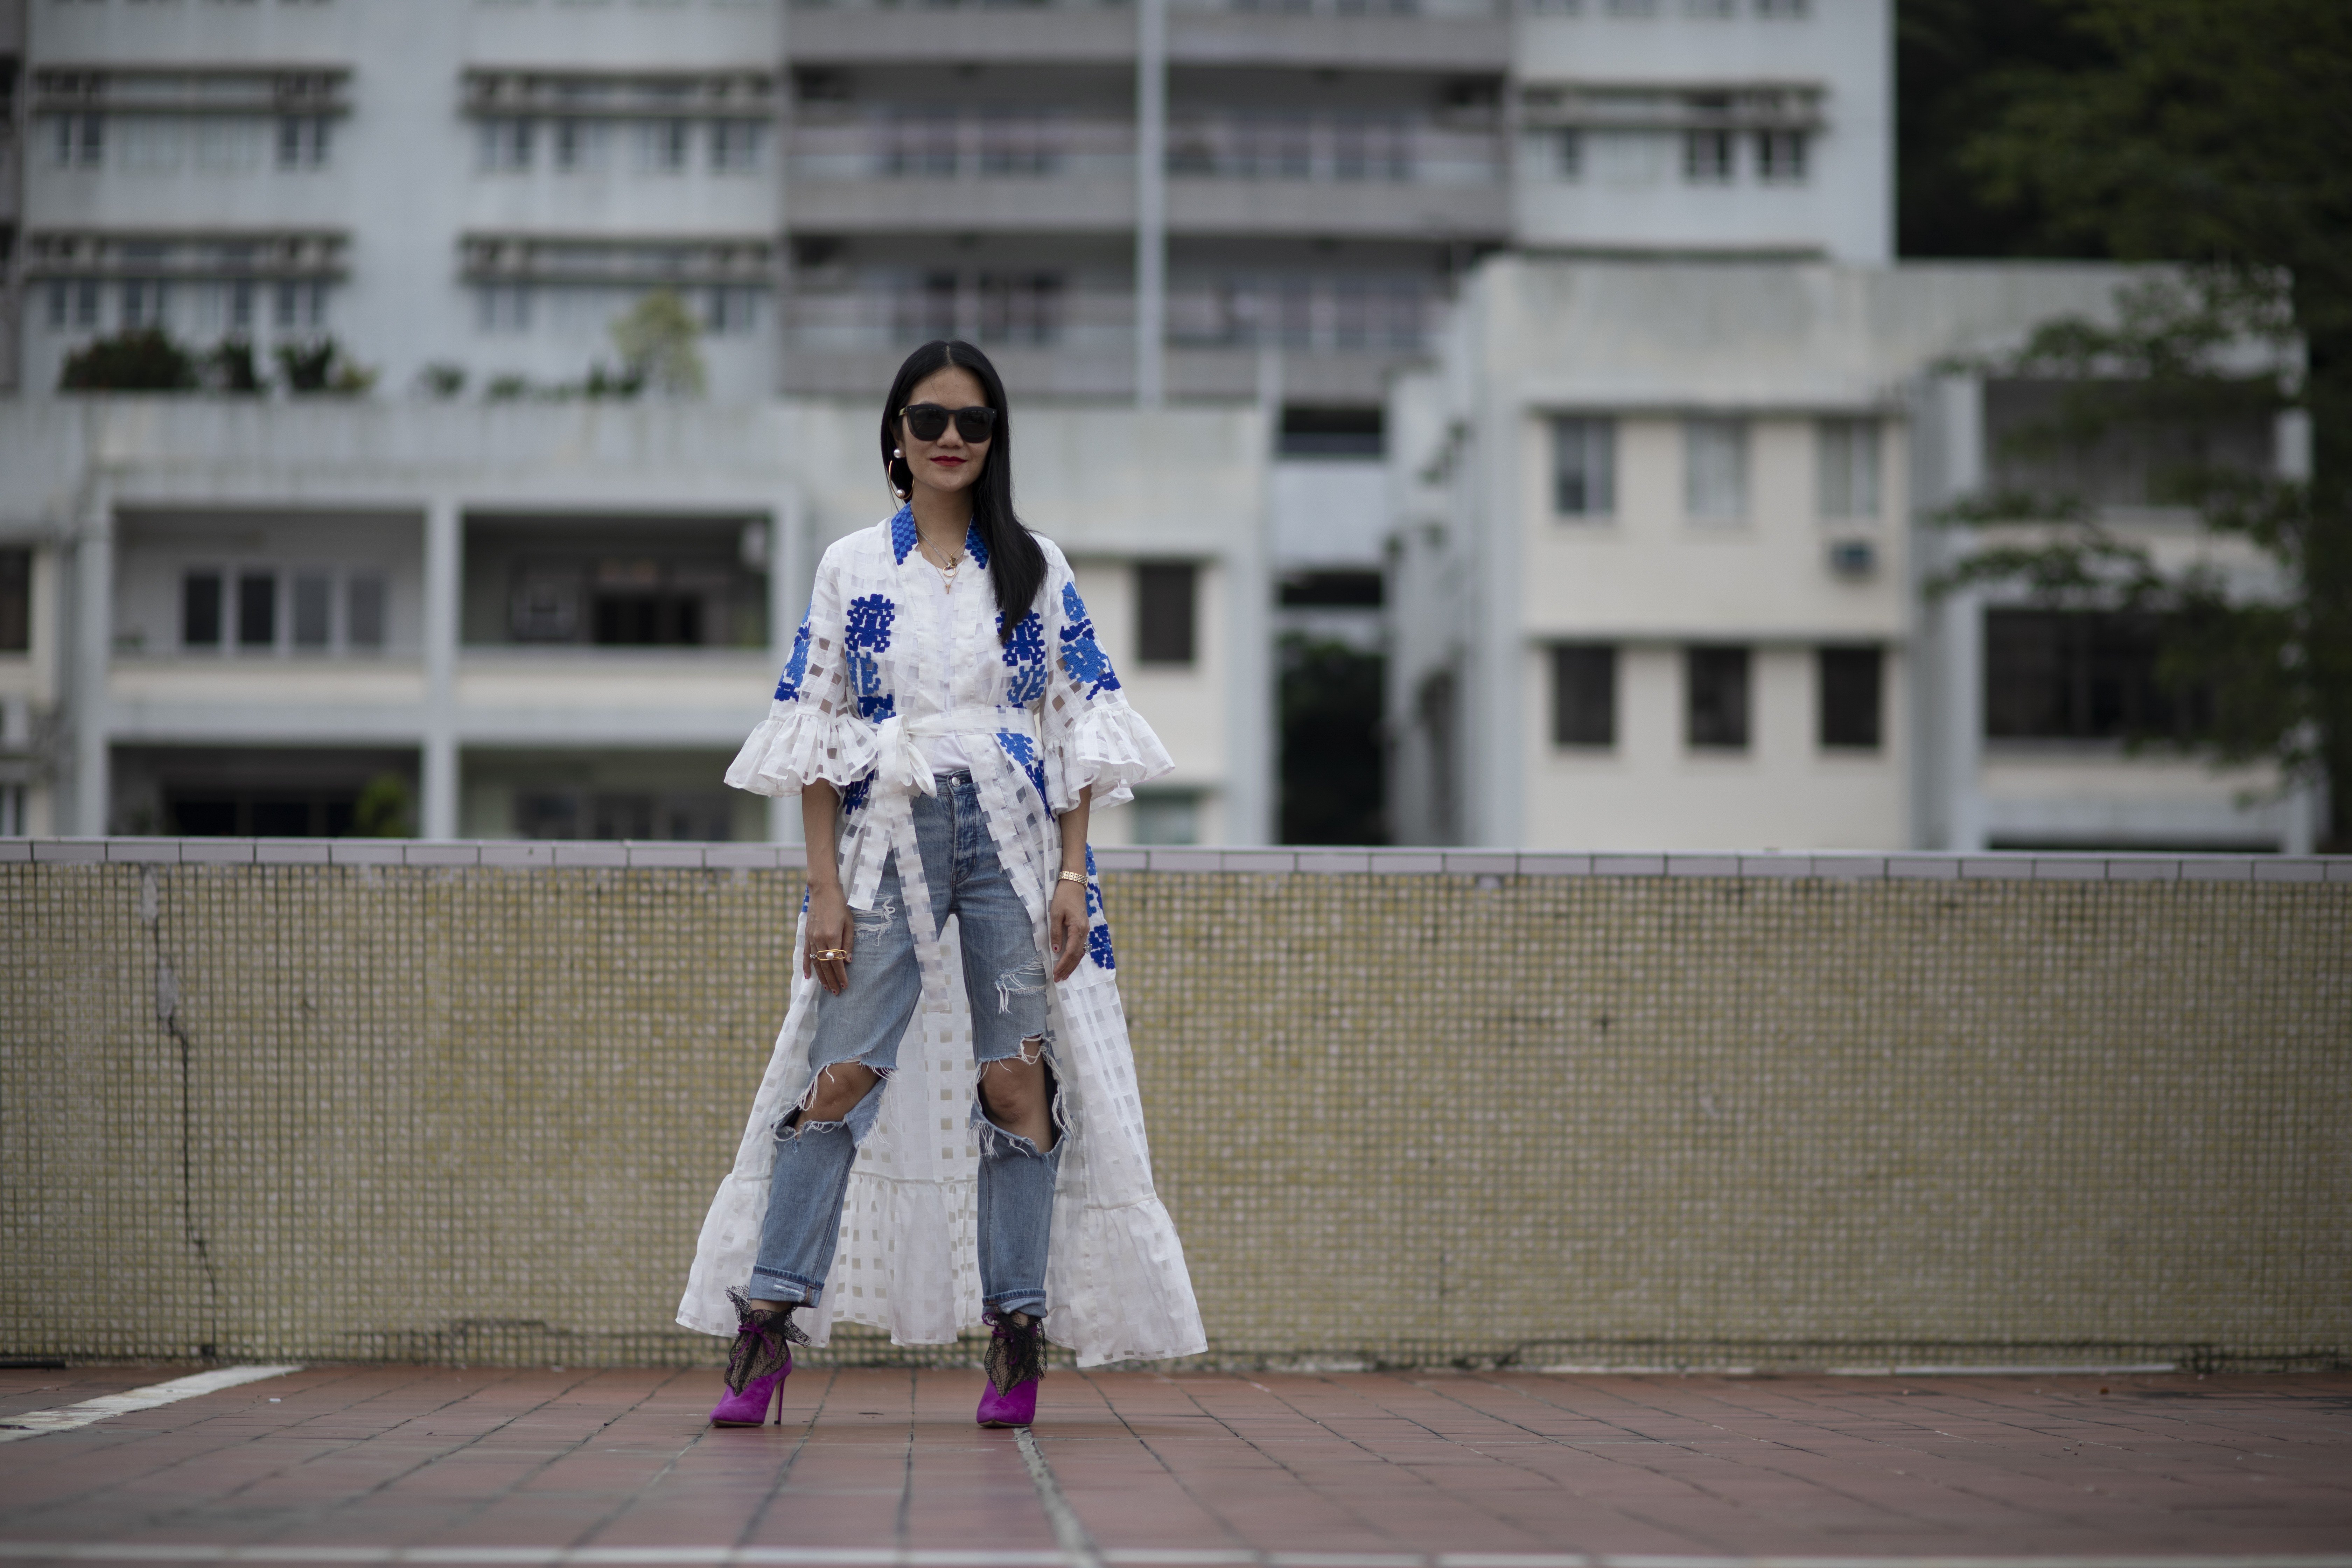 Grace Lam sports a coat dress by March 11, a white T-shirt by Muji, denim pants by American Eagle Outfitters, heels by Jimmy Choo and sunglasses by Grey Ant. Photo: Antony Dickson